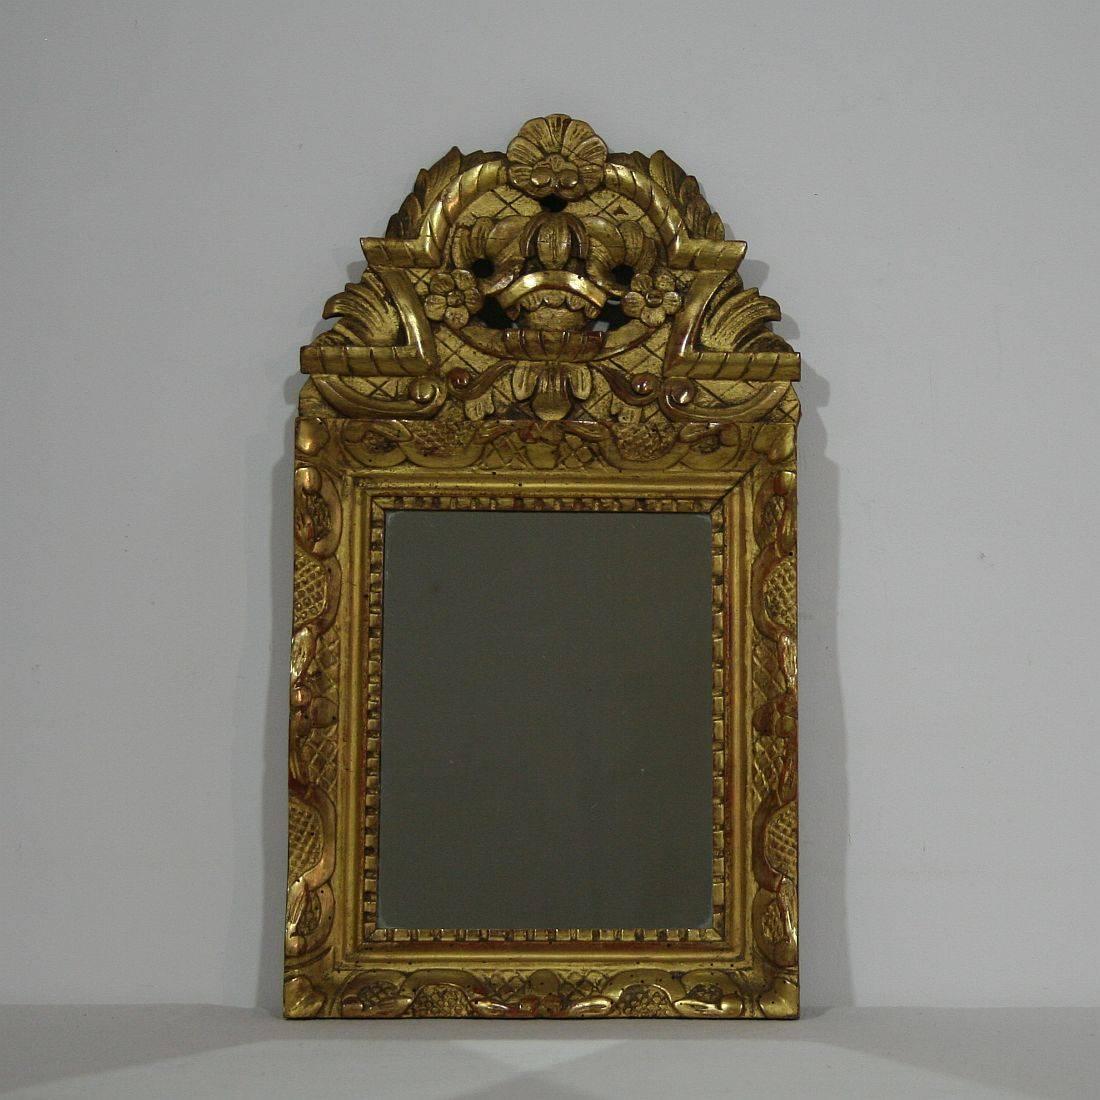 Small carved giltwood Louis XV style mirror.
France, circa 1850.